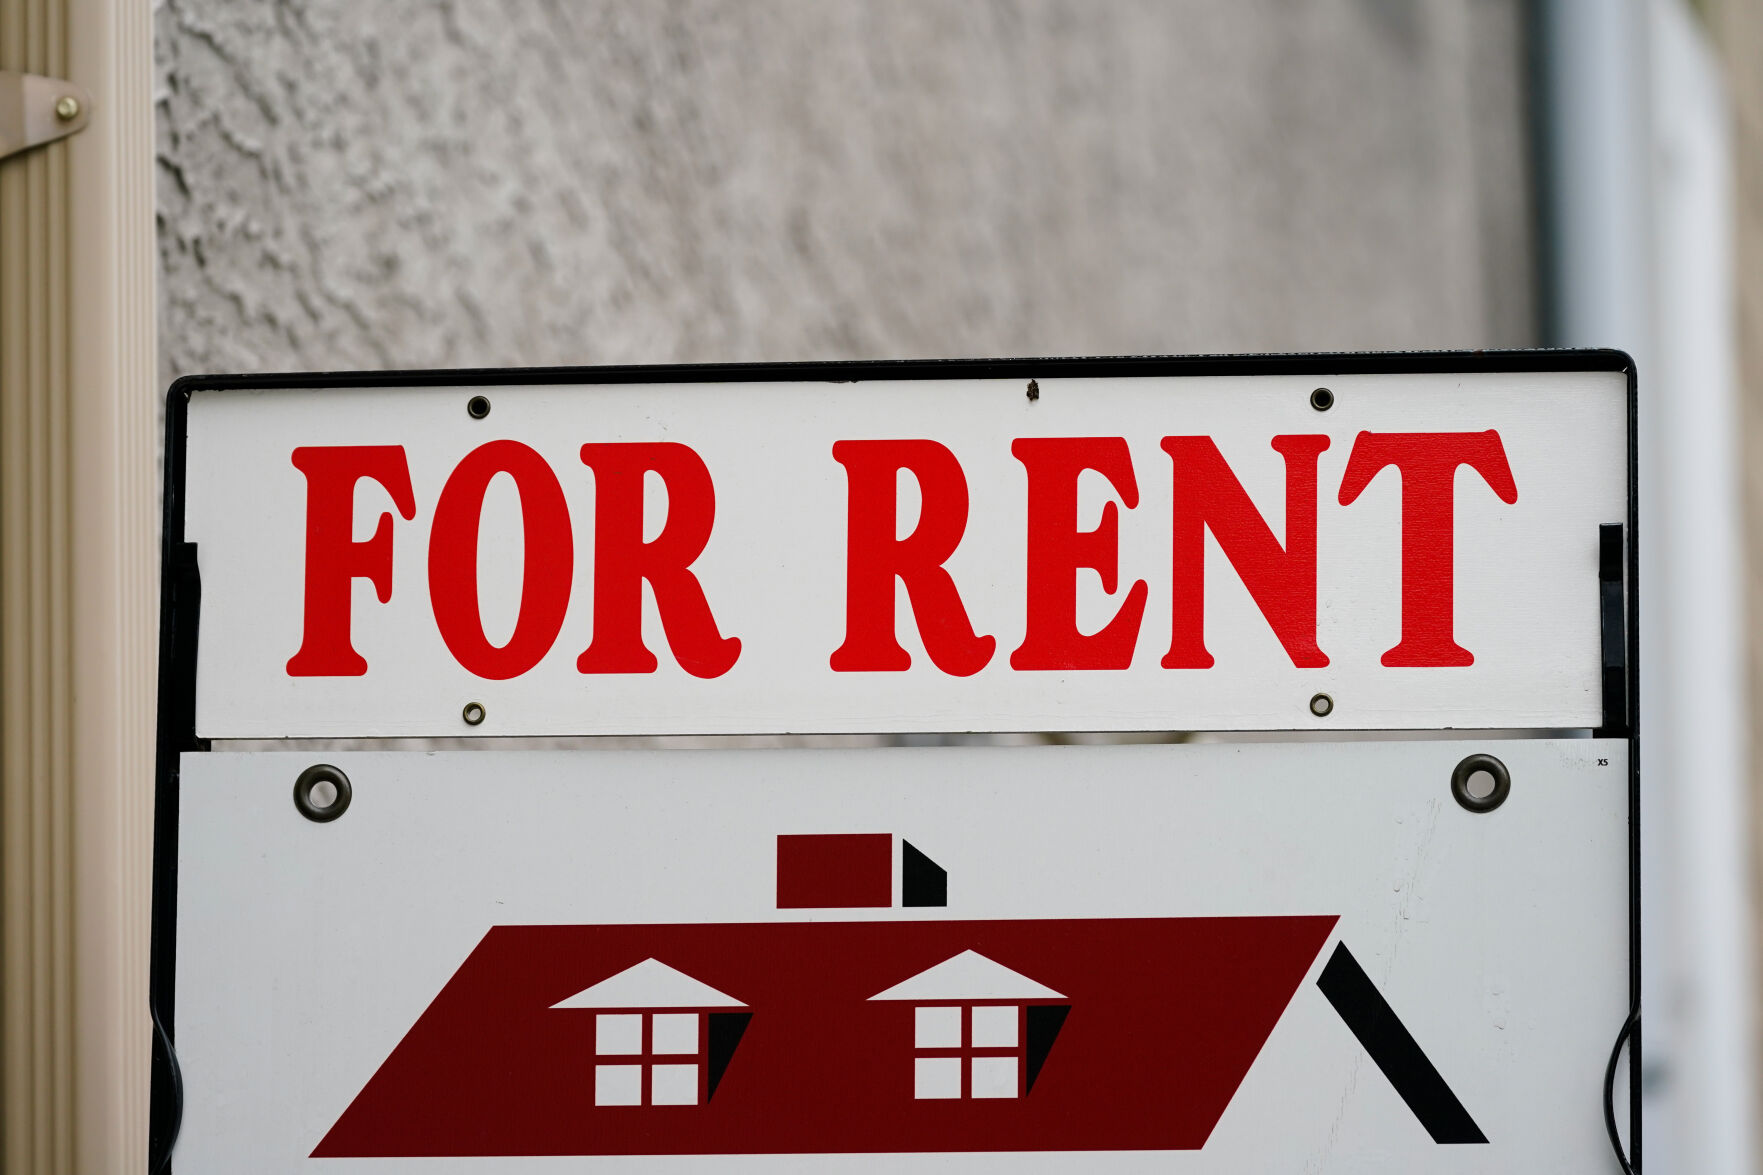 <p>FILE - A "For Rent" sign is displayed outside a building in Philadelphia, June 22, 2022. The cost of renting an apartment is easing after skyrocketing in recent years, though it remain painfully high for many Americans. The U.S. median rent rose 2.4% in January 2023 from a year earlier to $1,942, the lowest annual increase since June 2021, according to data from Rent, which tracks listings for apartment and rental houses. (AP Photo/Matt Rourke, File)</p>   PHOTO CREDIT: Matt Rourke 